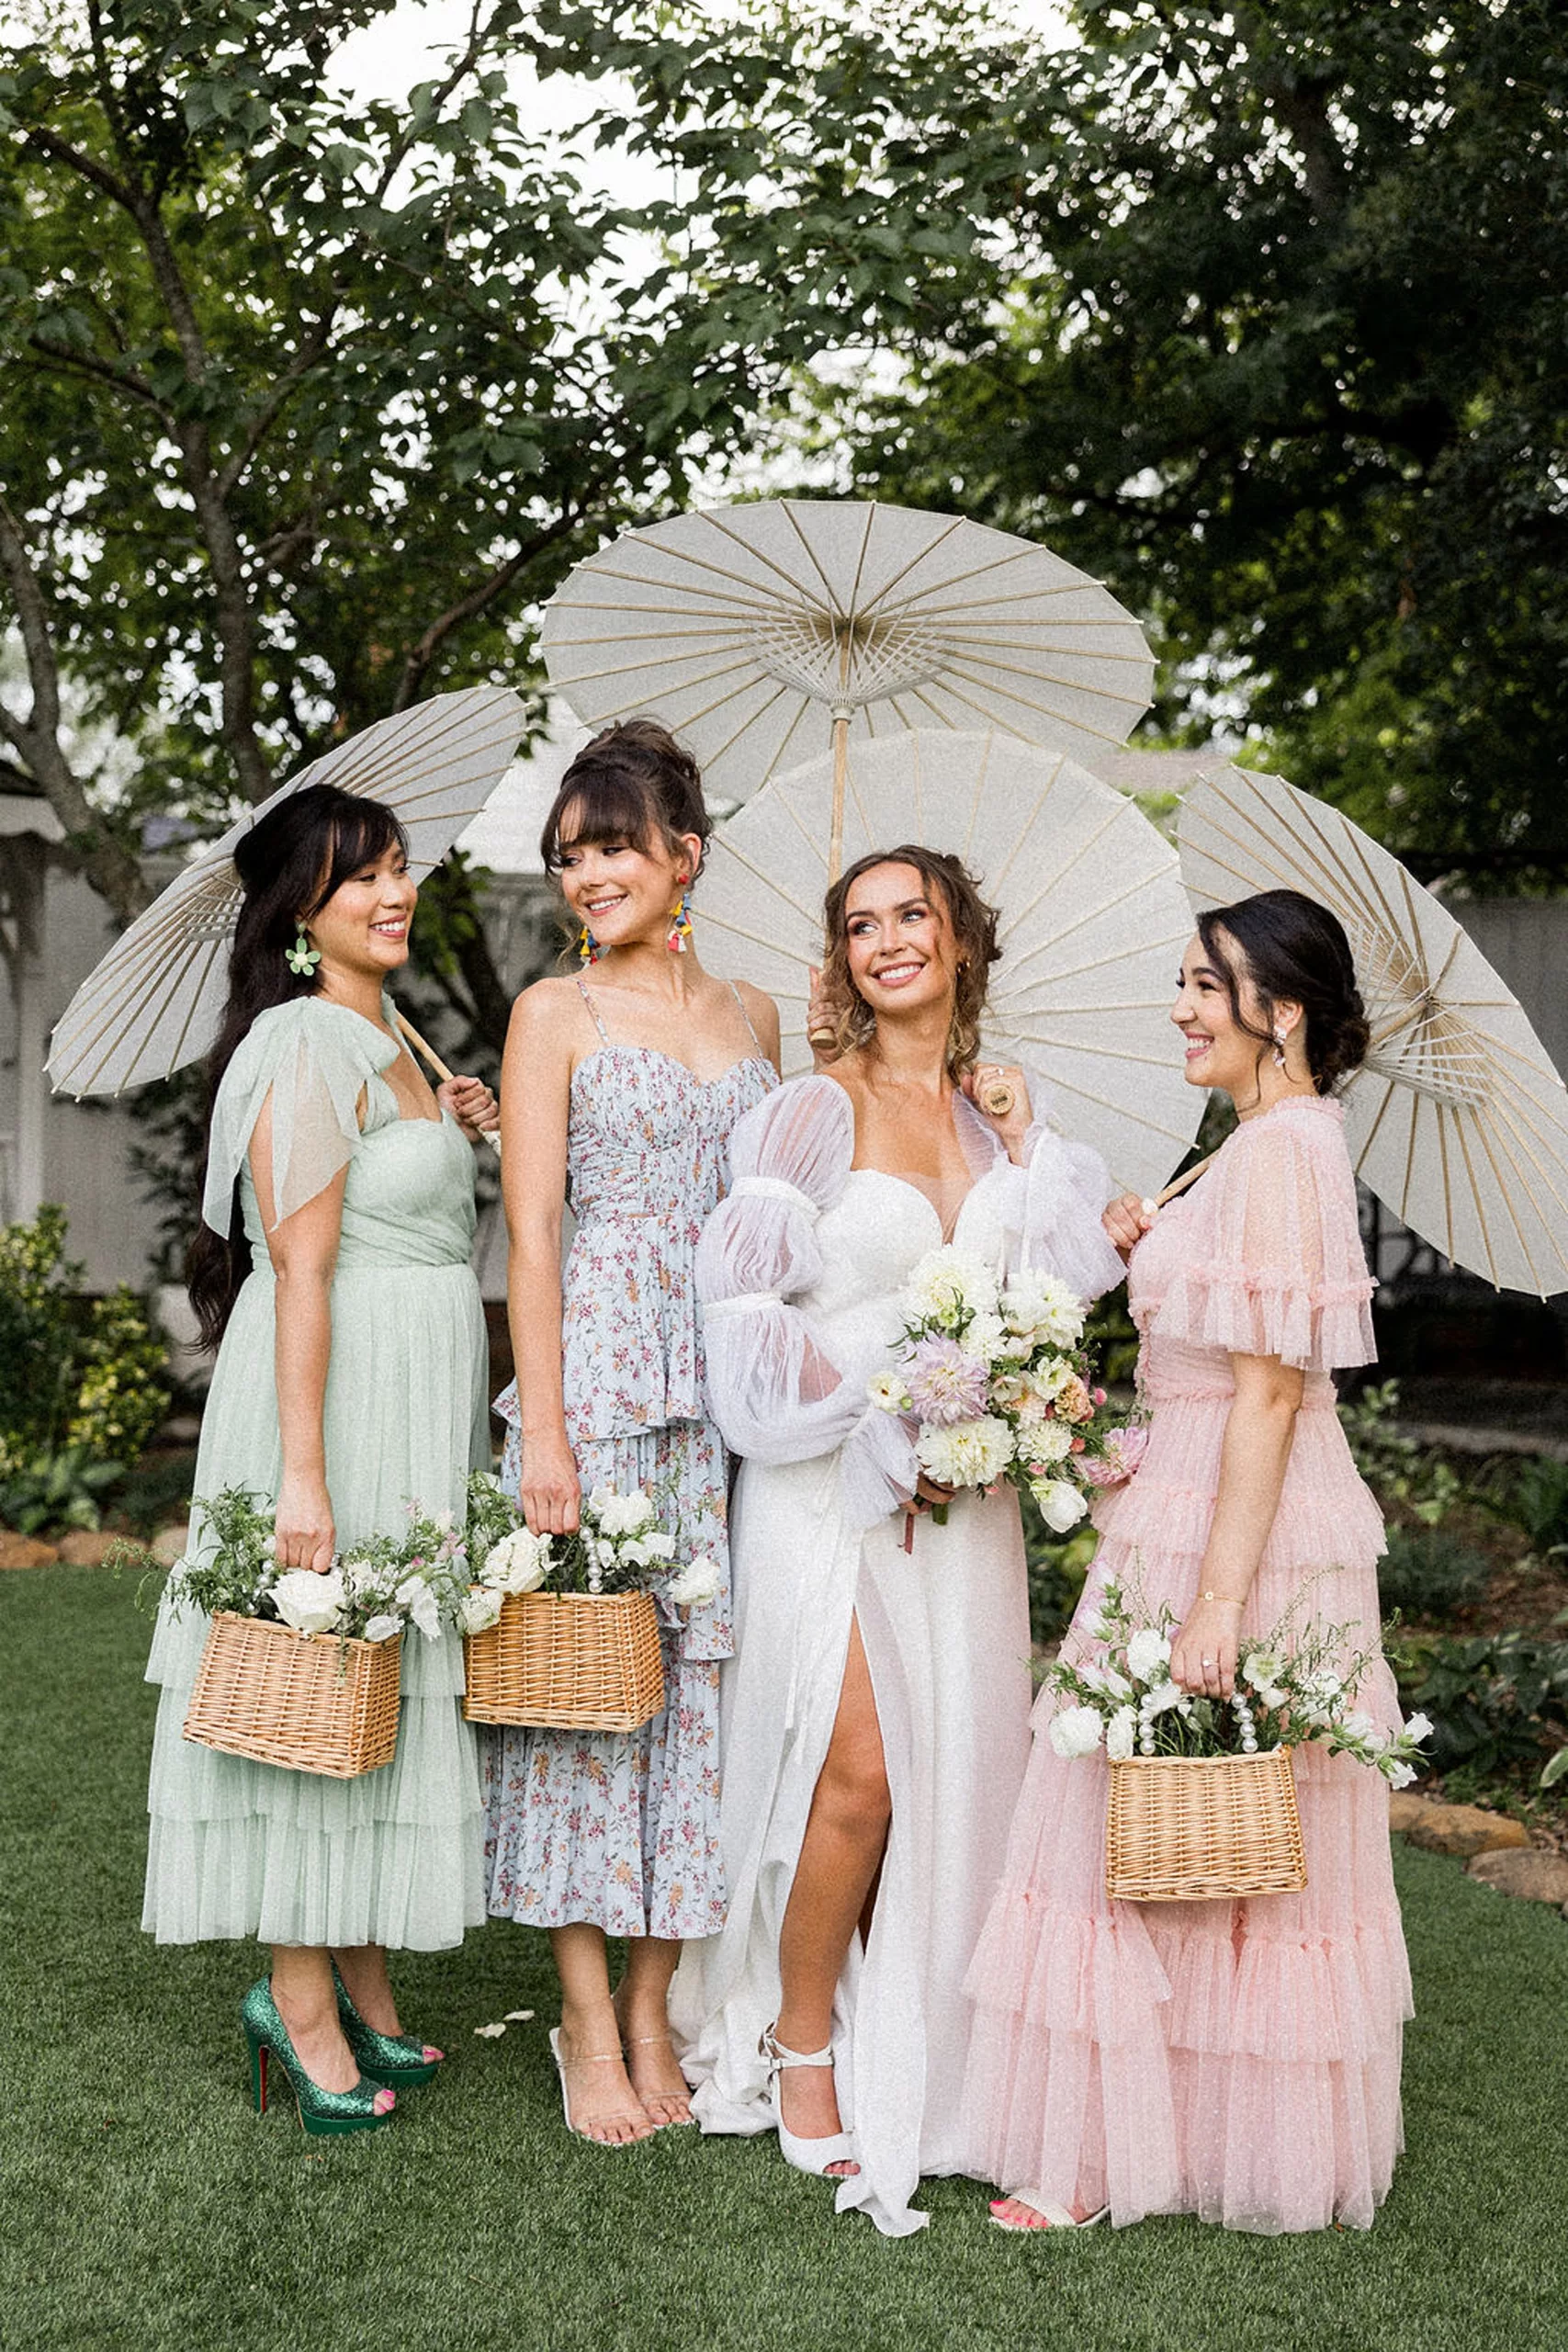 A bride stands in a garden holding umbrellas with her three bridesmaids